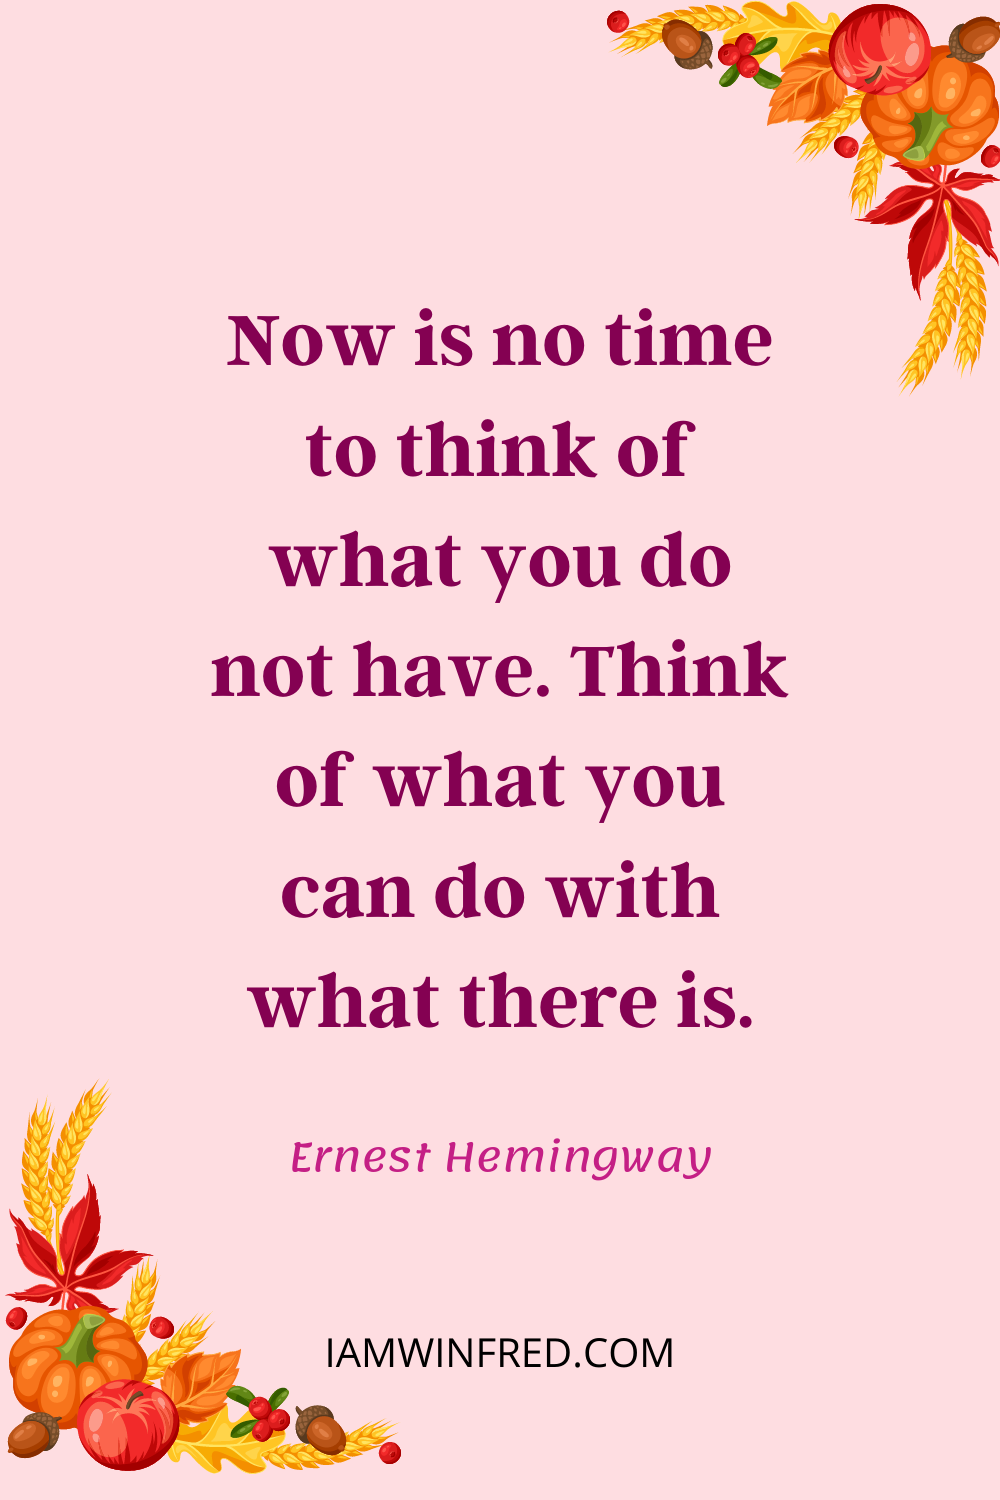 Now Is No Time To Think Of What You Do Not Have. Think Of What You Can Do With What There Is.